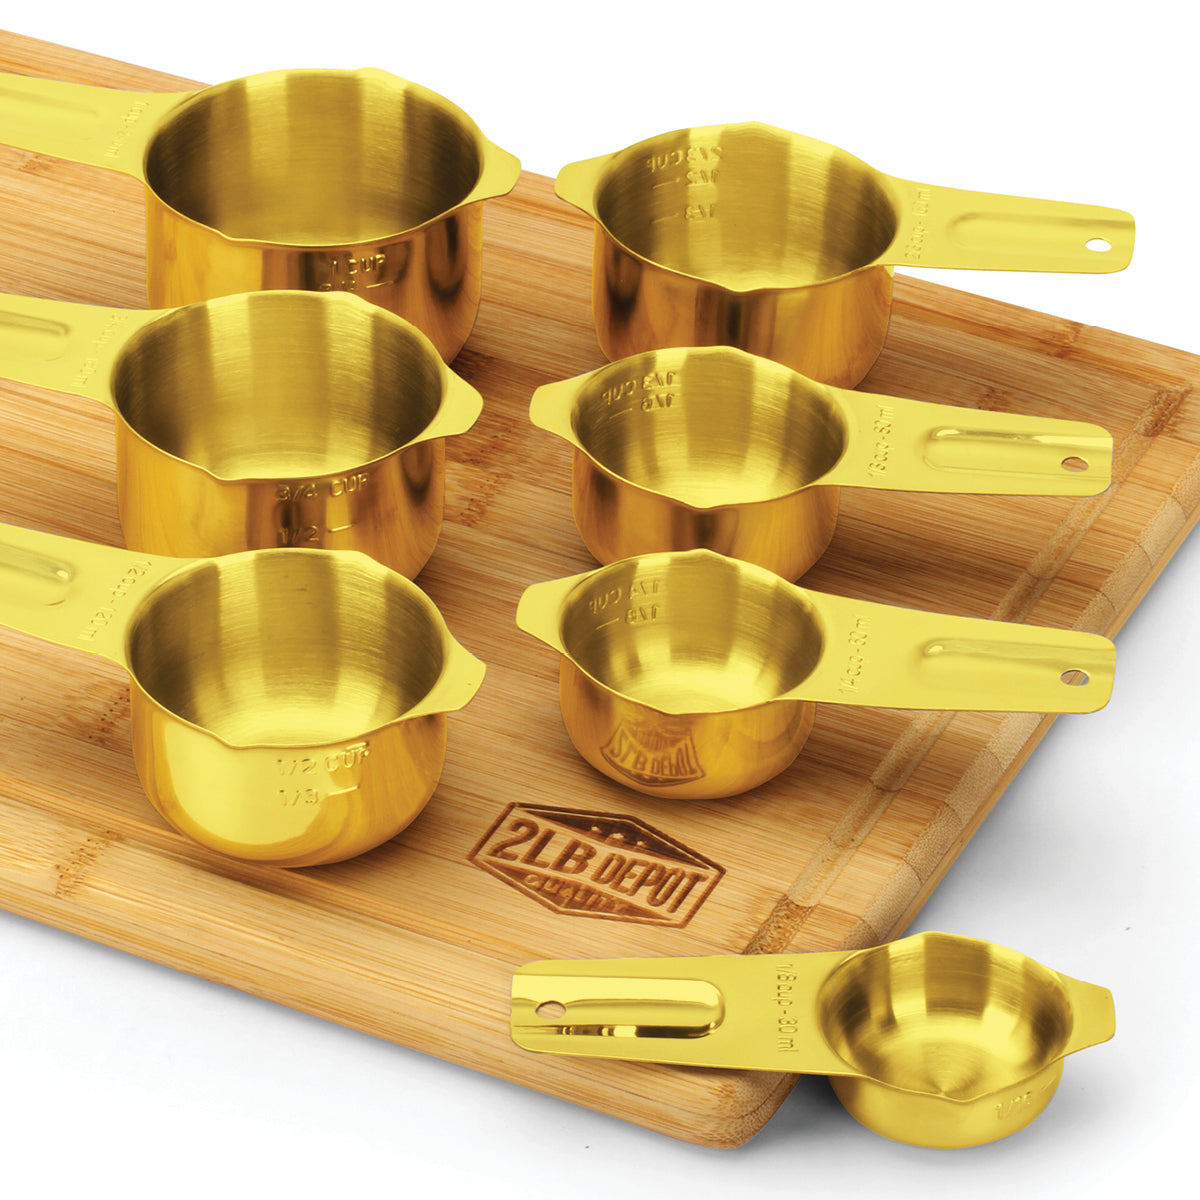 Stainless Steel Gold Measuring Cups (7 Piece Set)